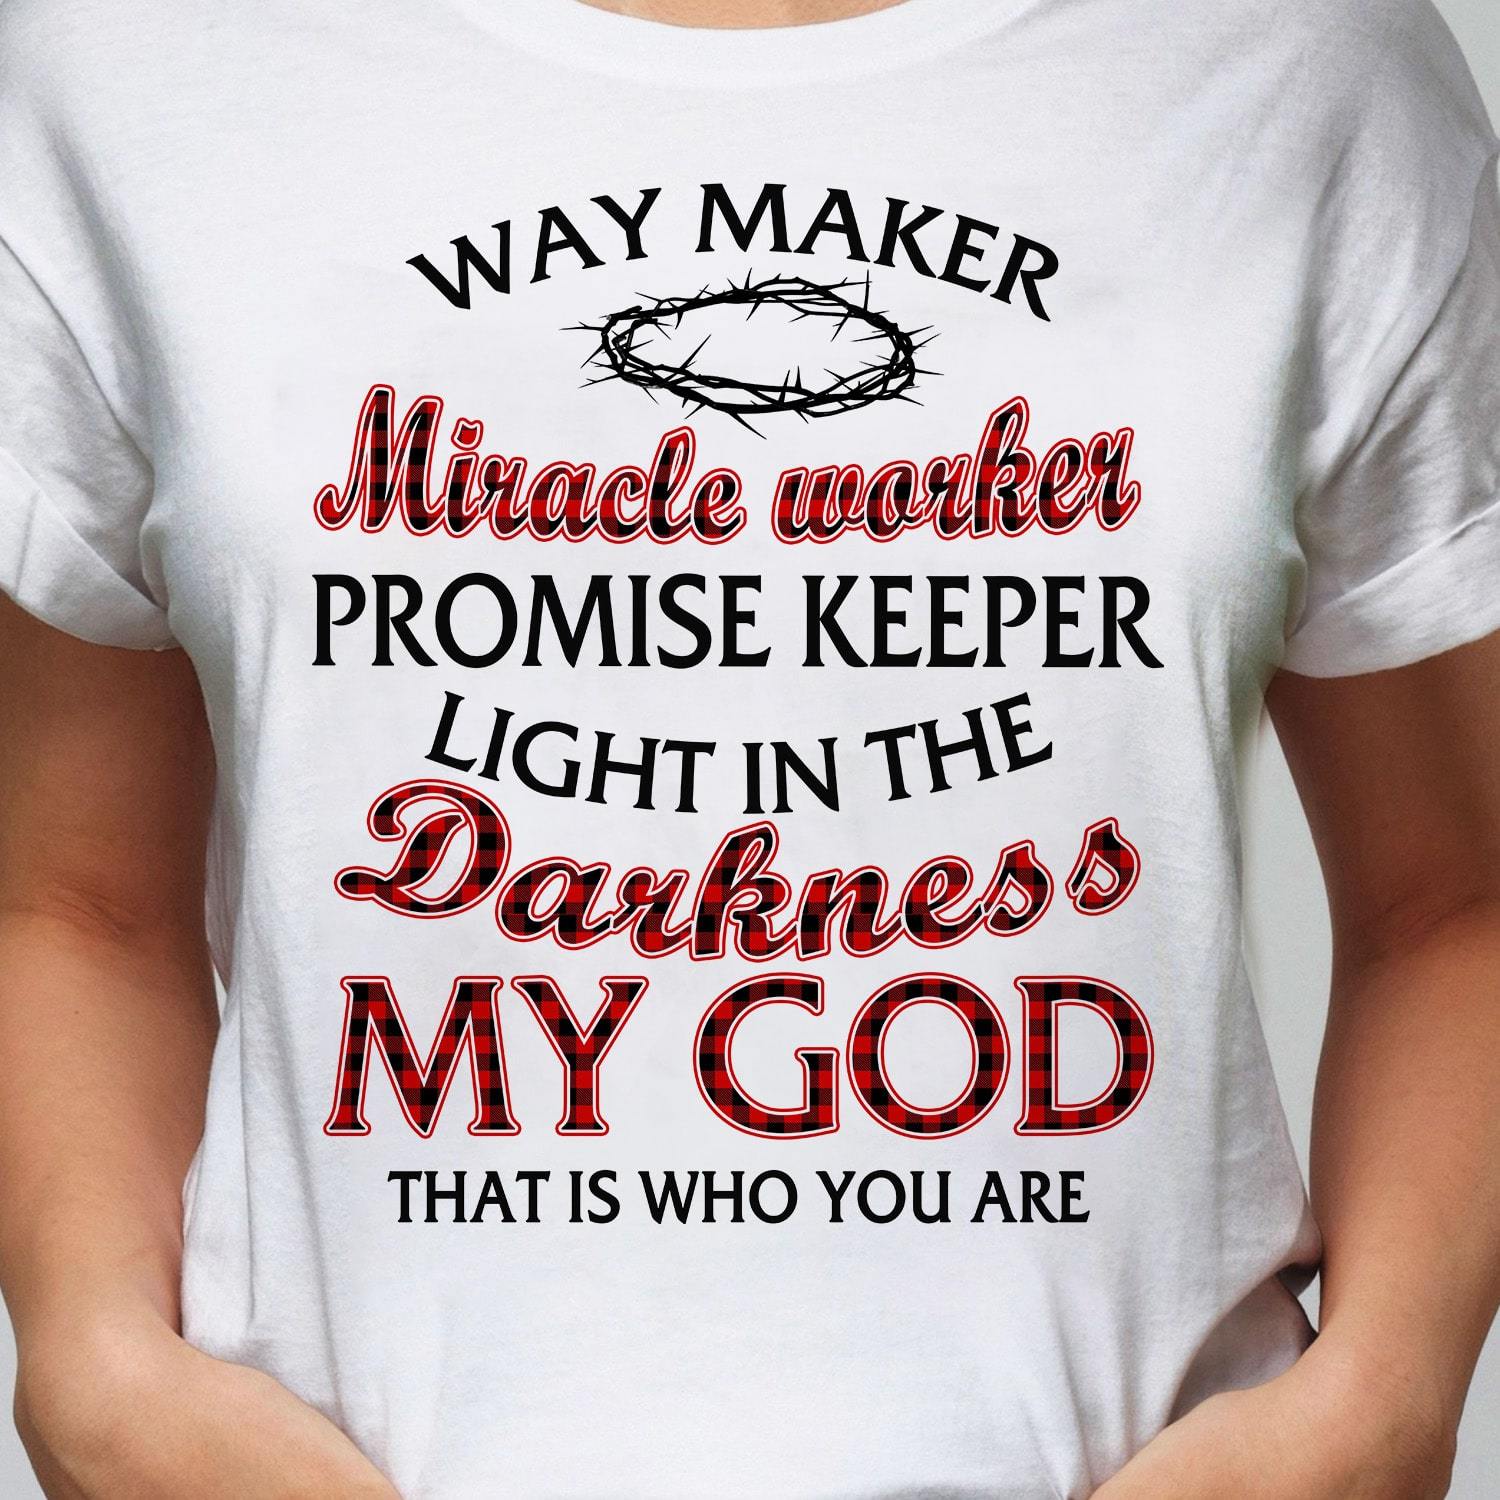 My God That is who you are – Jesus T Shirt